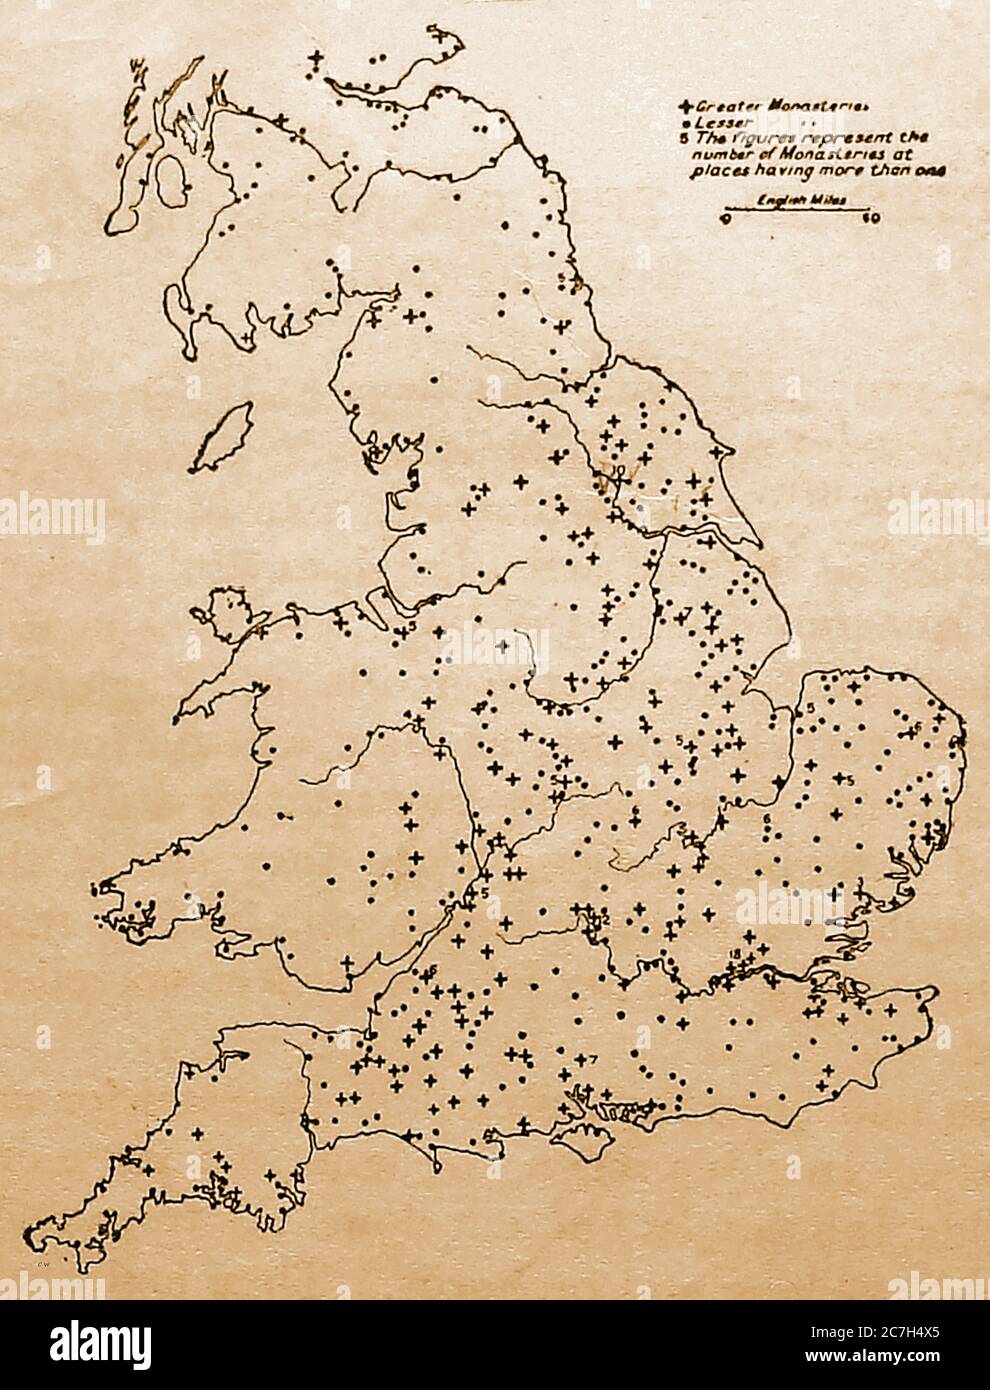 A 1921  map of the religious houses in Britain at the time of the dissolution including  Lesser monasteries (1535) & Greater monasteries (1539)  which suppressed ,nunneries, friaries, convents, priories & abbeys and confiscated their wealth. Stock Photo